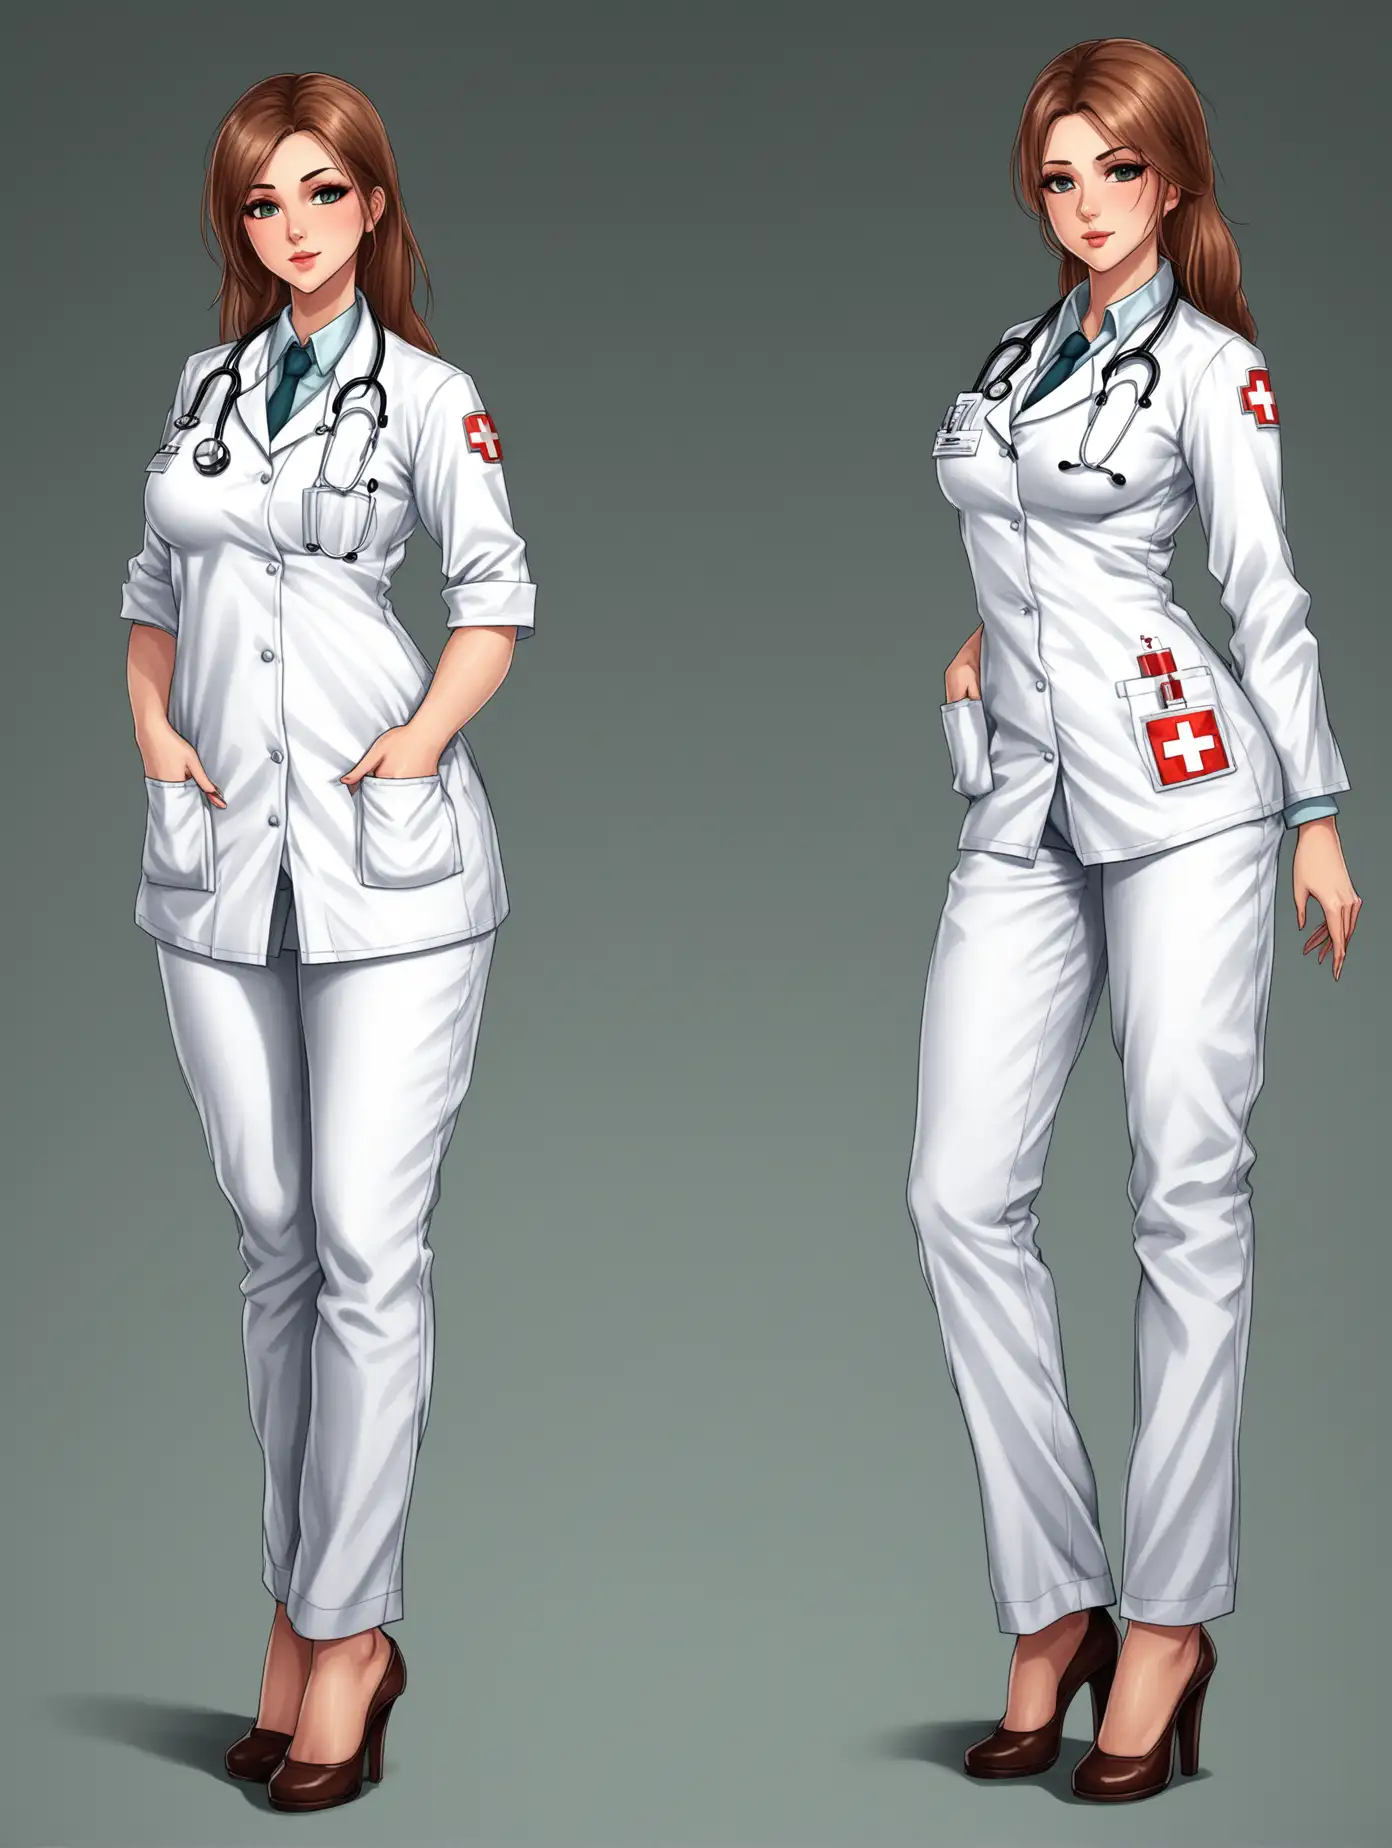 Sensual picture of a hot girl, age 30, tall, big ass, medic doctor outfit, 2 poses, full body